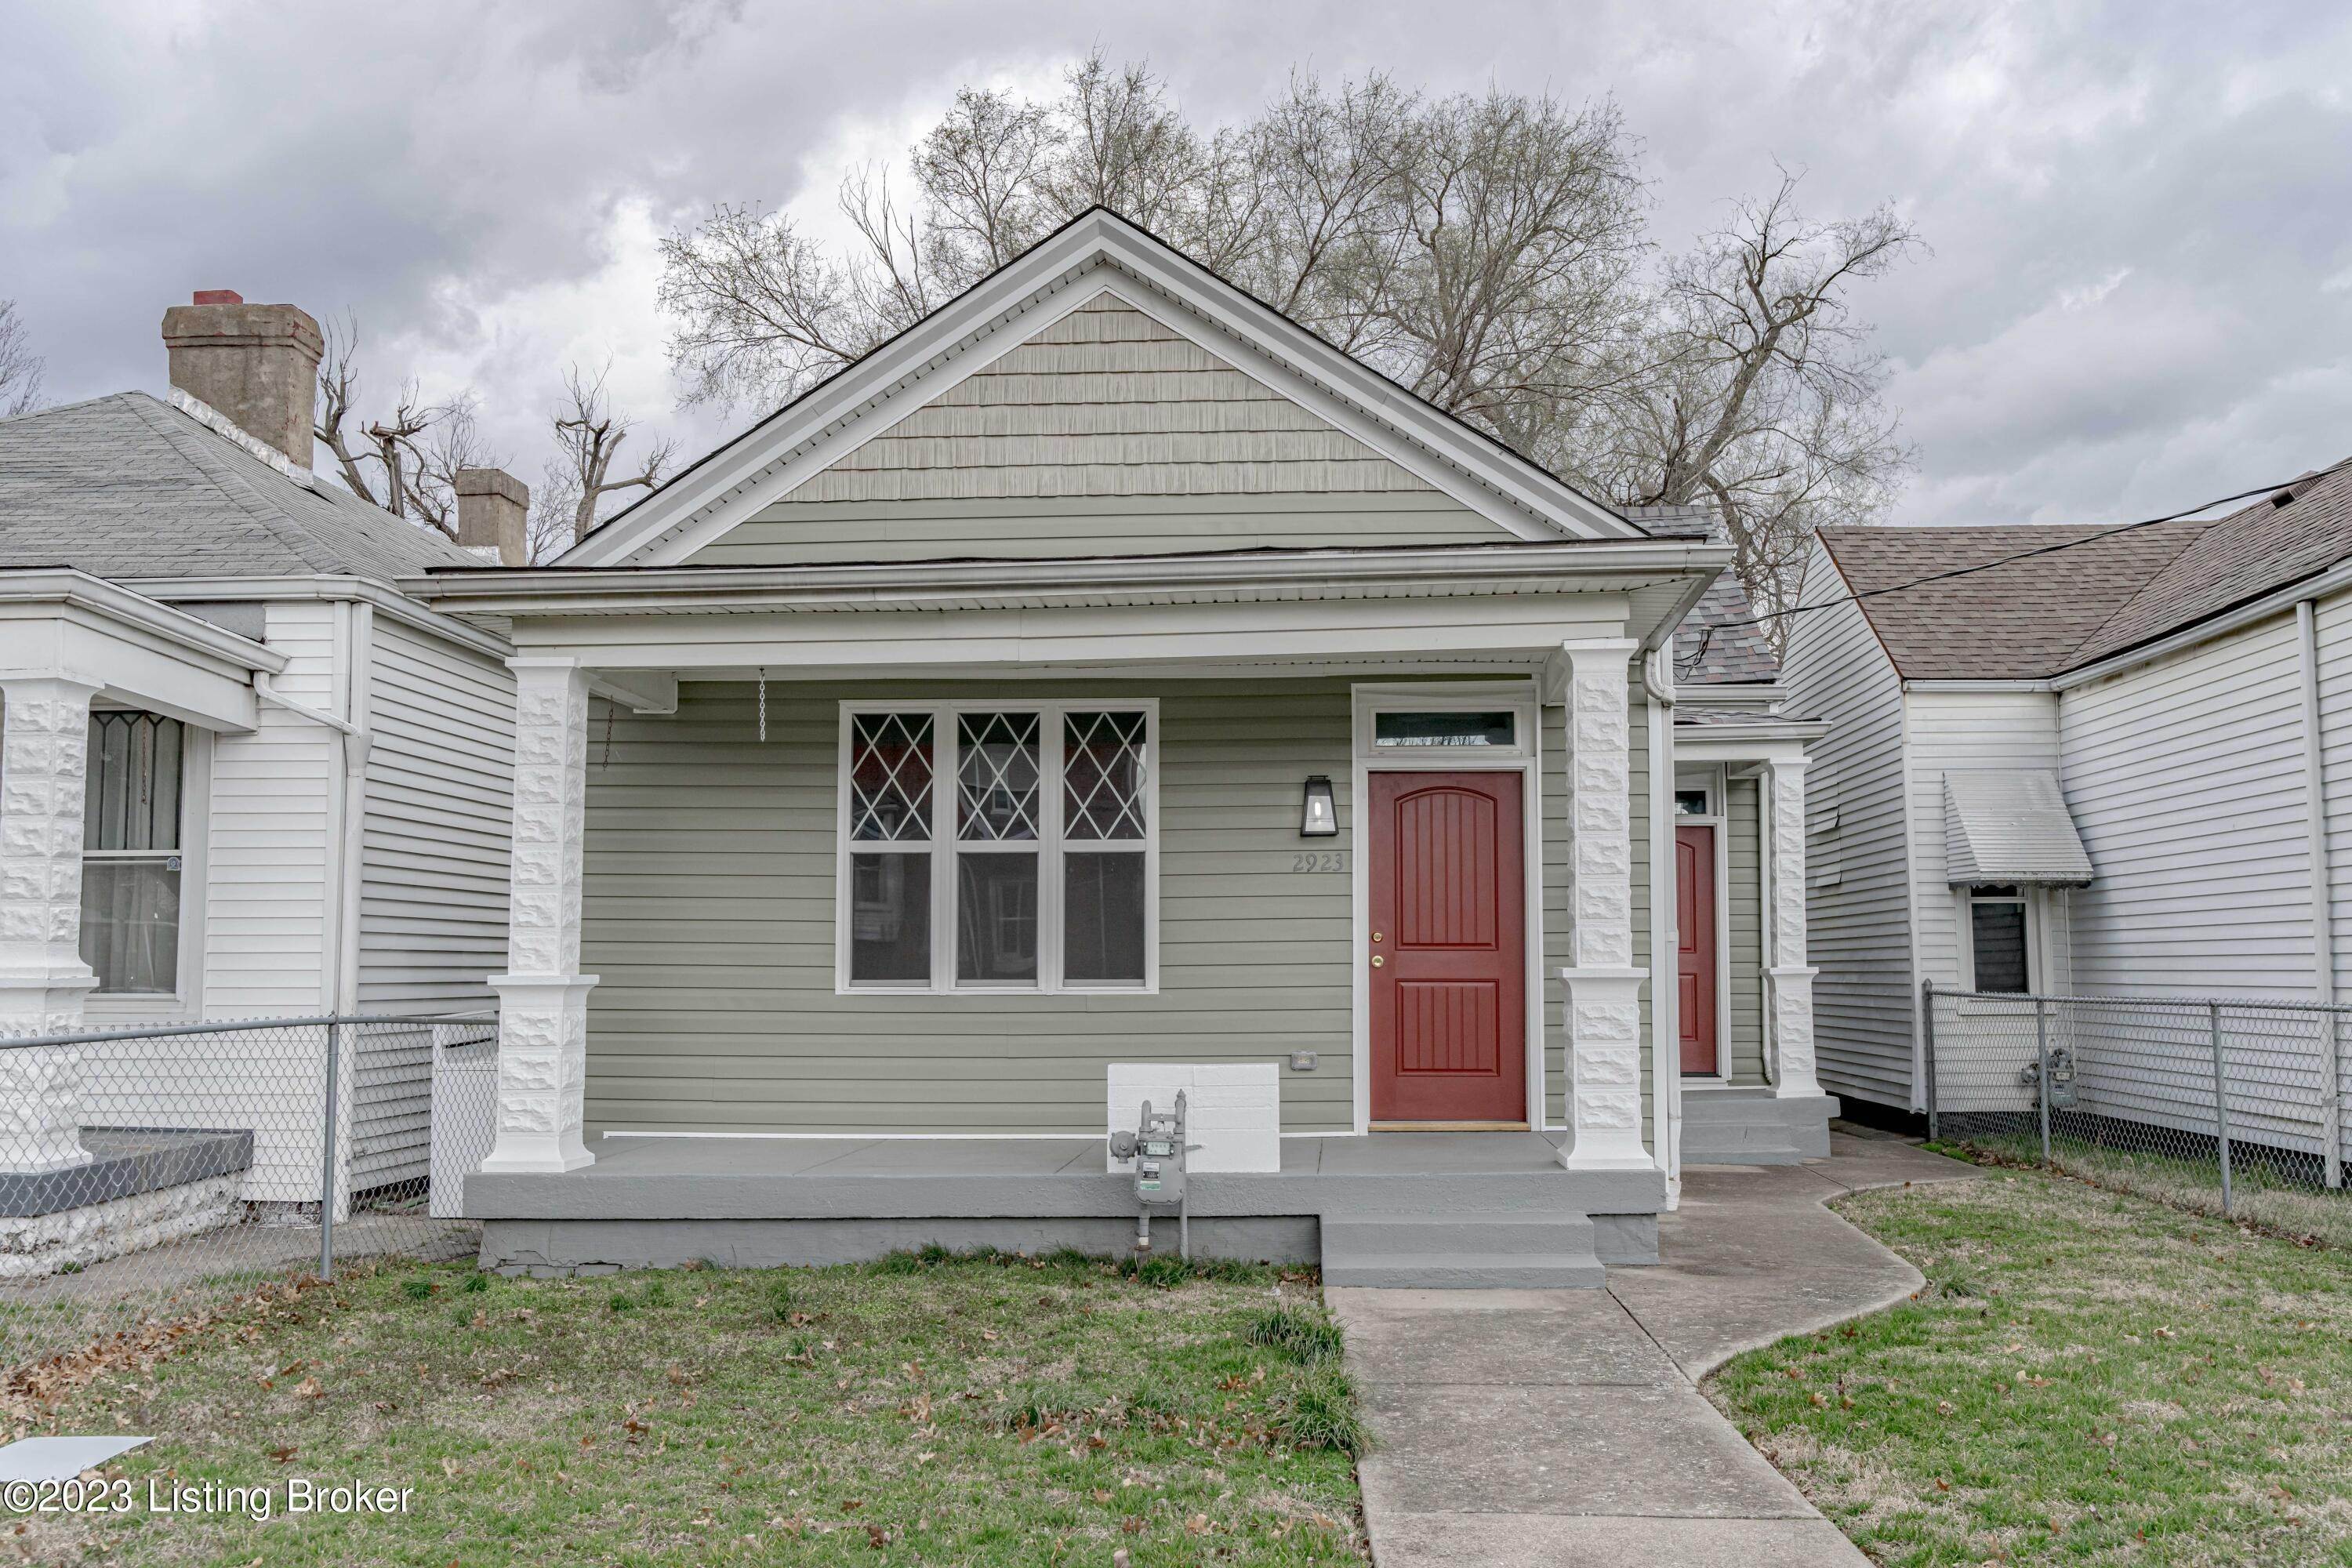 3. Single Family at Louisville, KY 40212